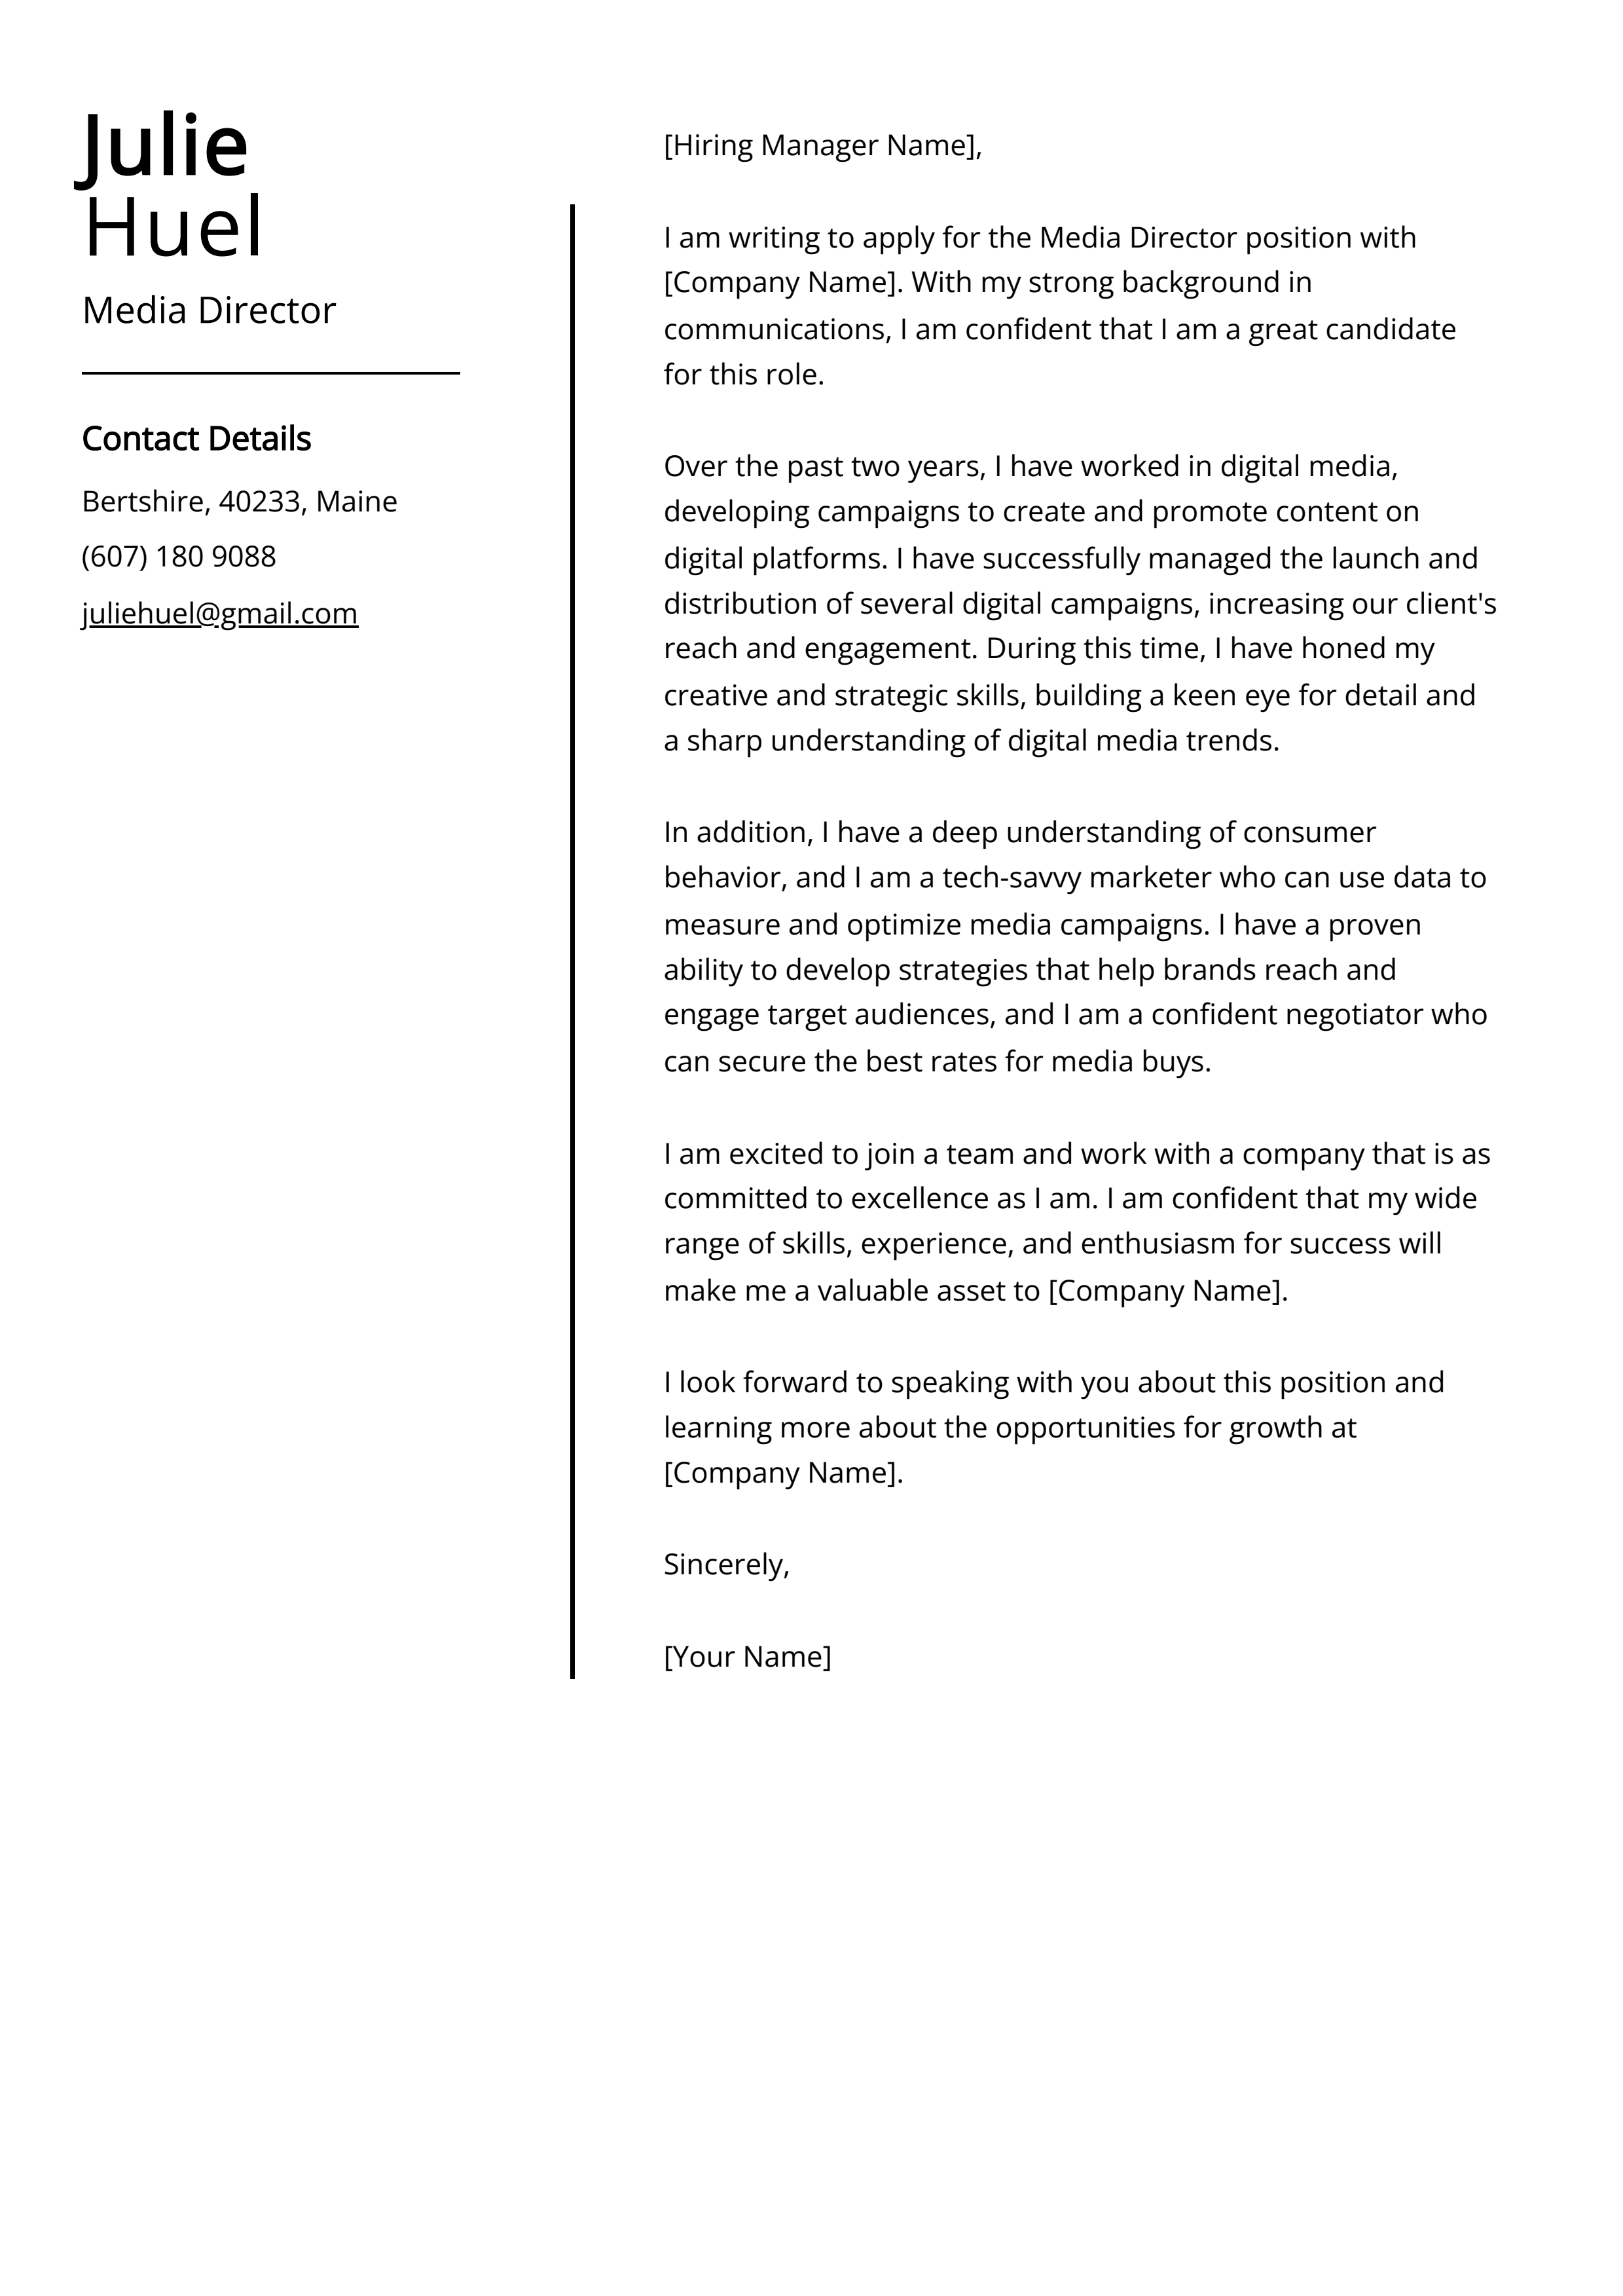 Media Director Cover Letter Example